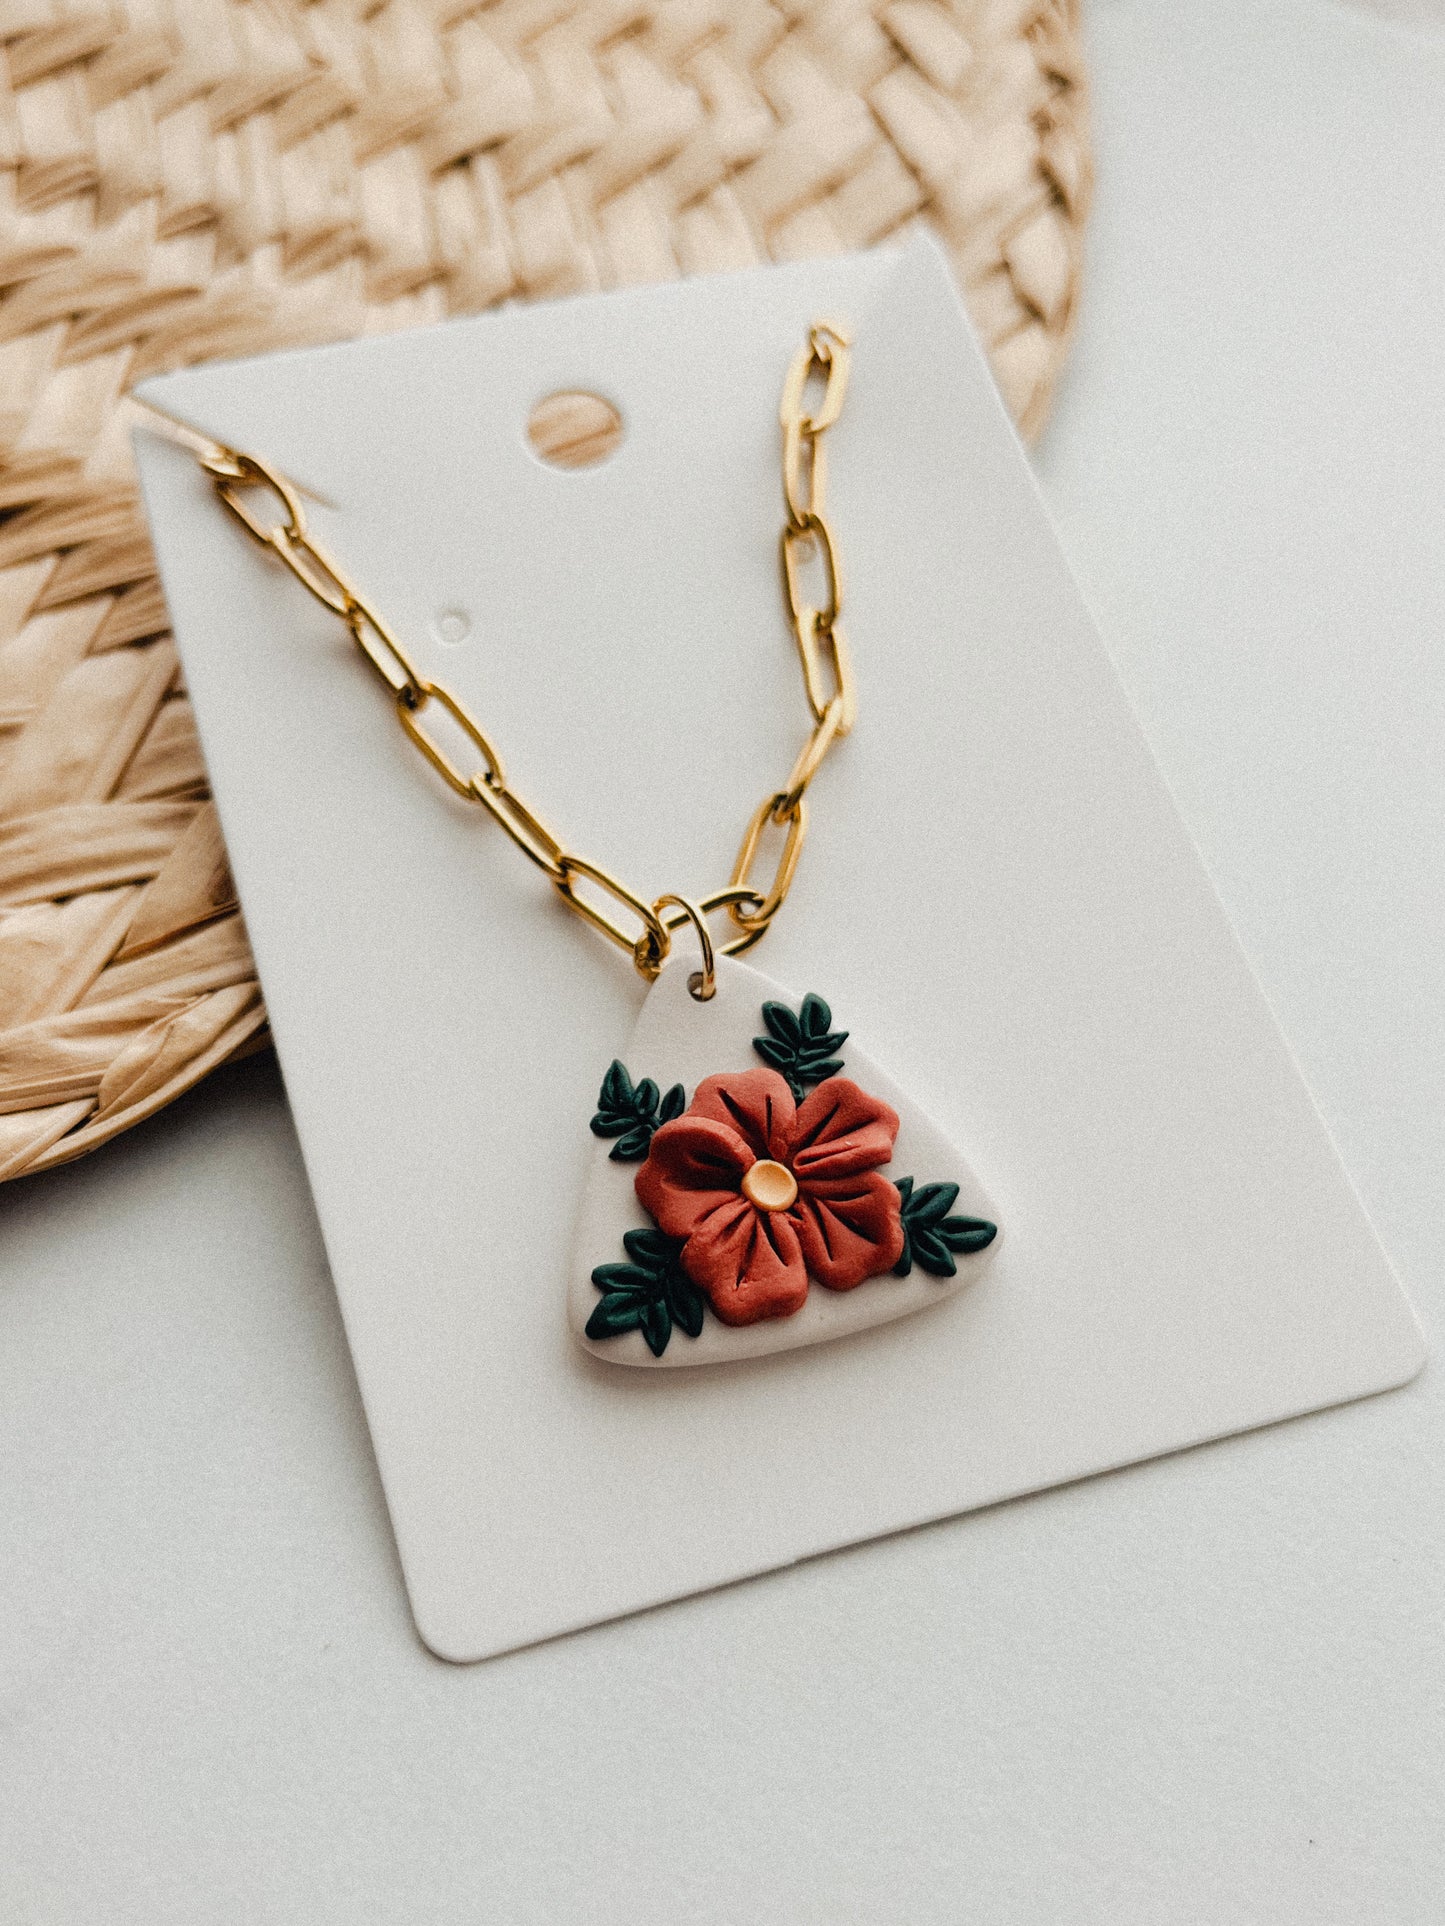 The Floral Clay Paperclip Necklace